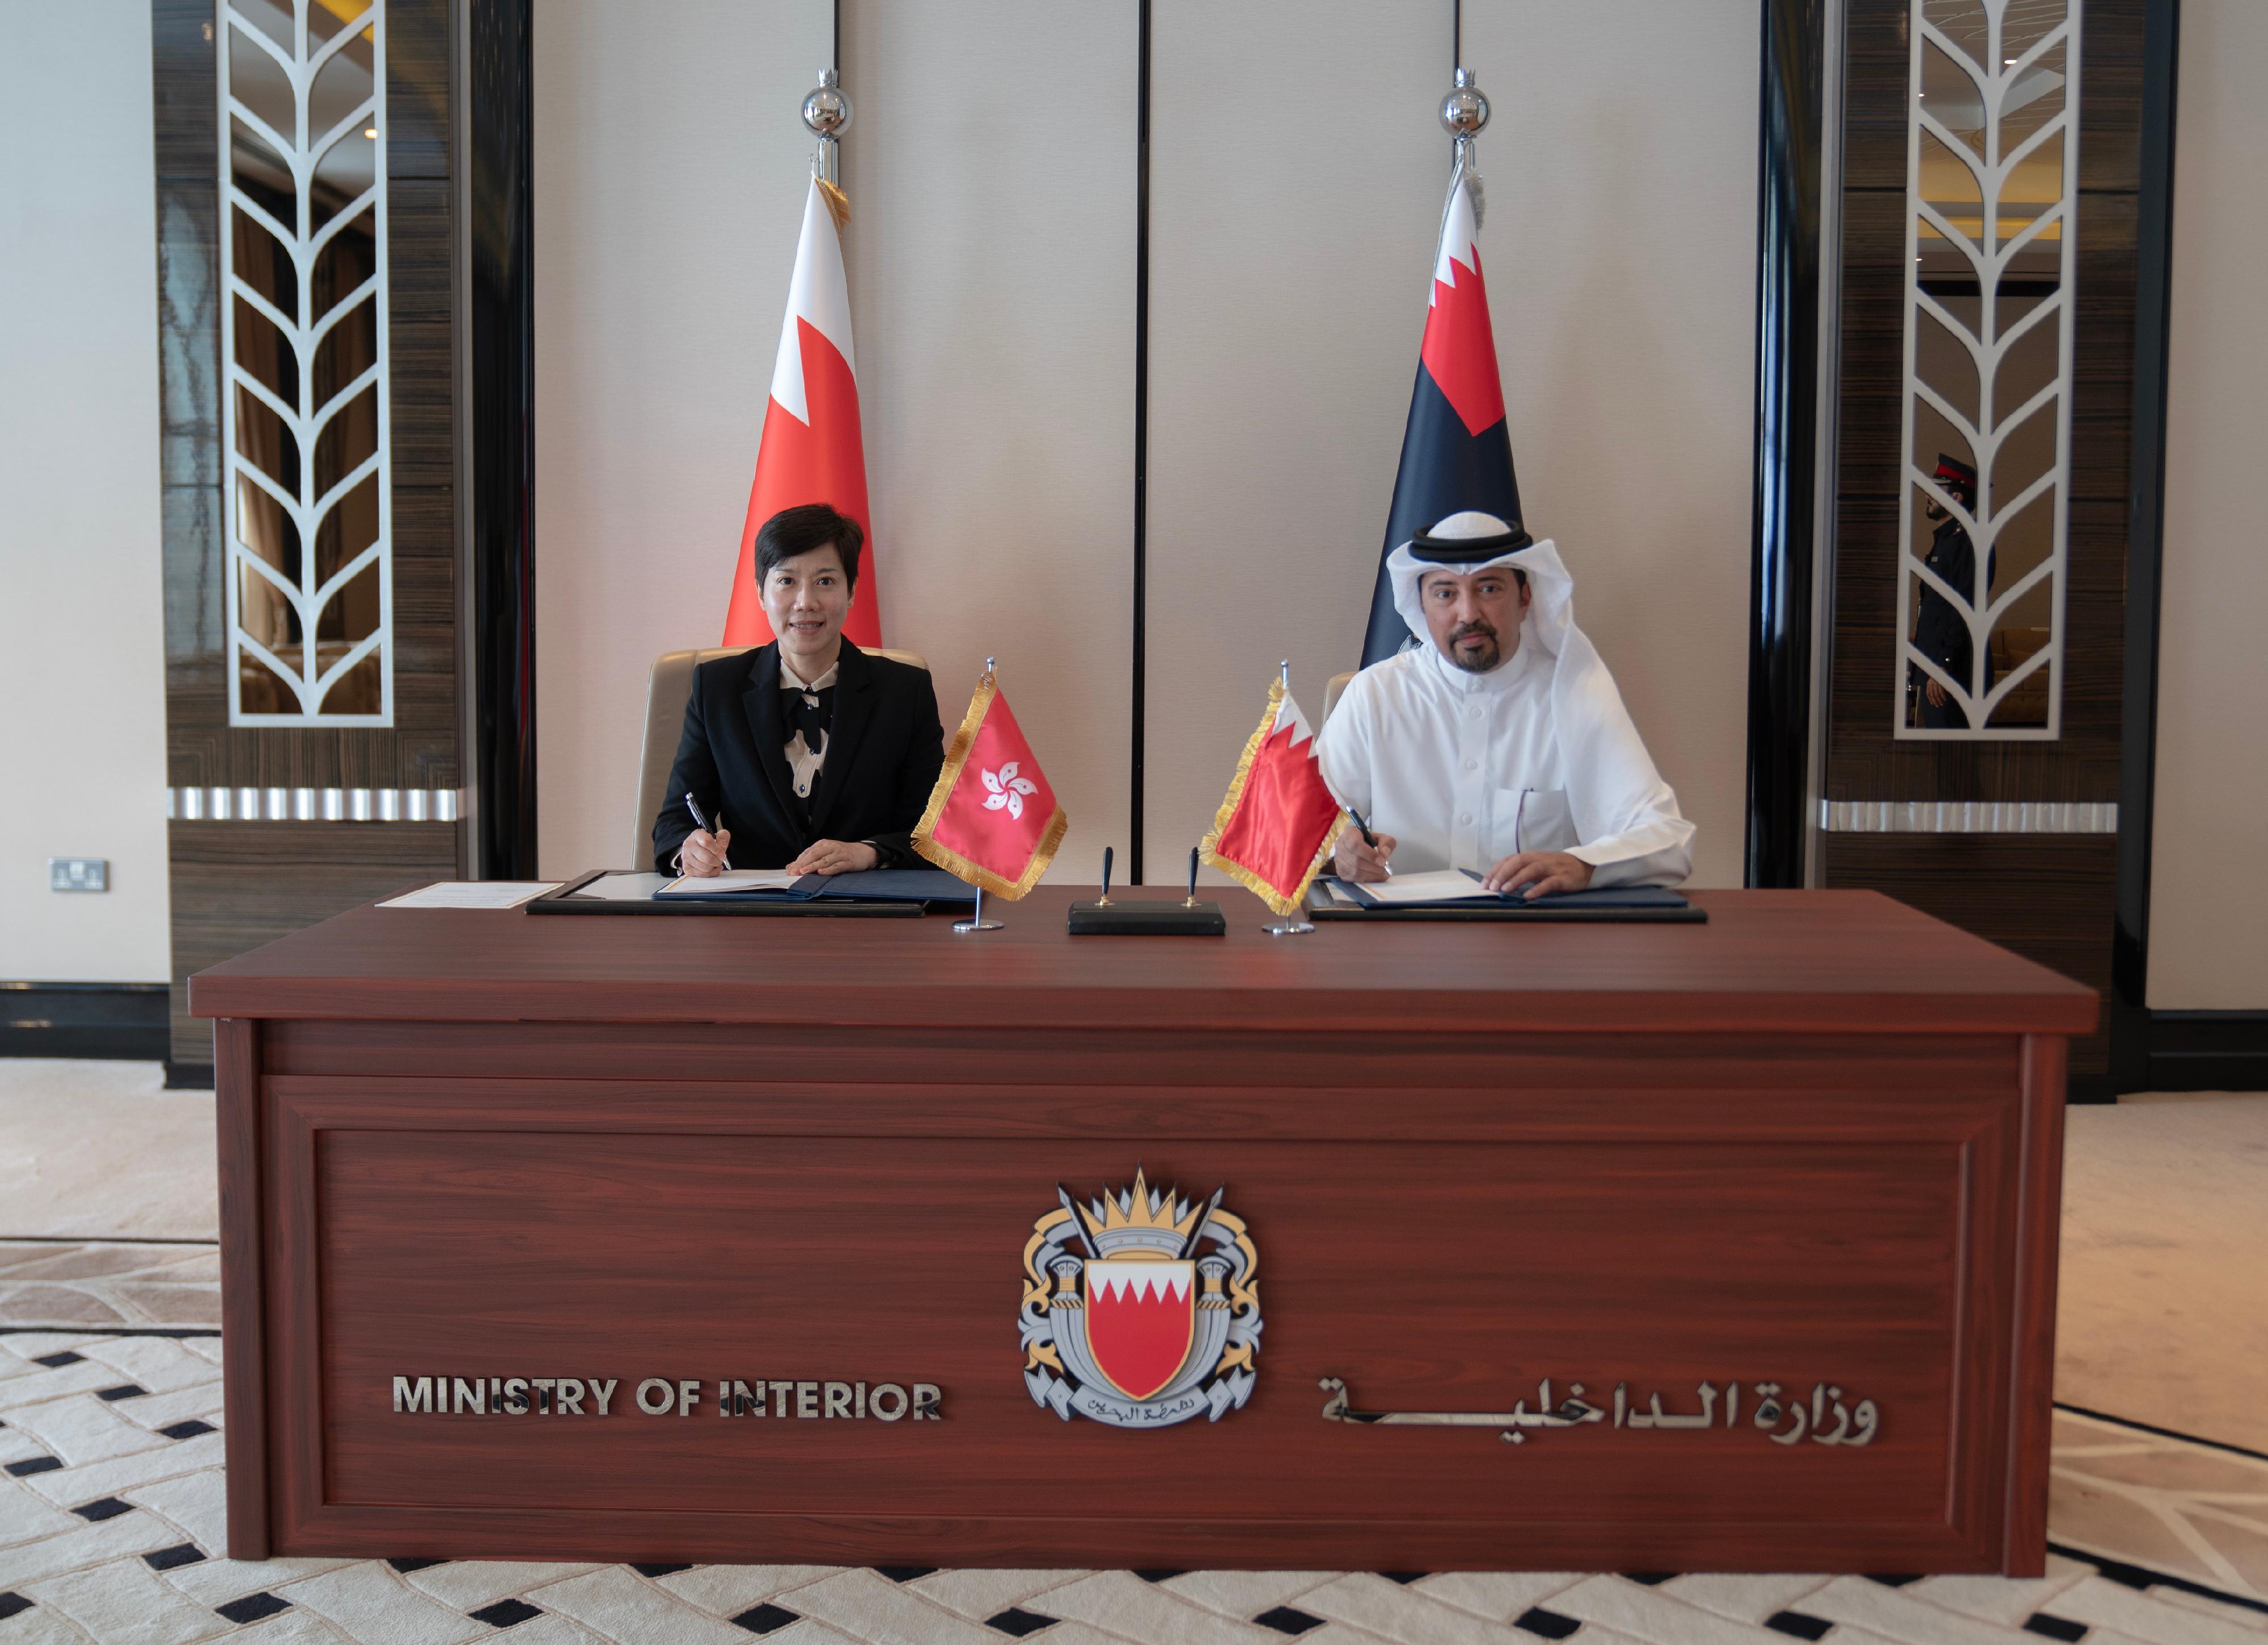 The Commissioner of Customs and Excise, Ms Louise Ho (left), today (April 22) led a delegation of Hong Kong Customs to visit the Bahrain Customs Affairs (BCA) and sign the Authorized Economic Operator Mutual Recognition Arrangement with the President of the BCA, Mr Shaikh Ahmed bin Hamad Al Khalifa (right), with an aim of strengthening mutual trade relationship and fostering greater security in the global supply chain.